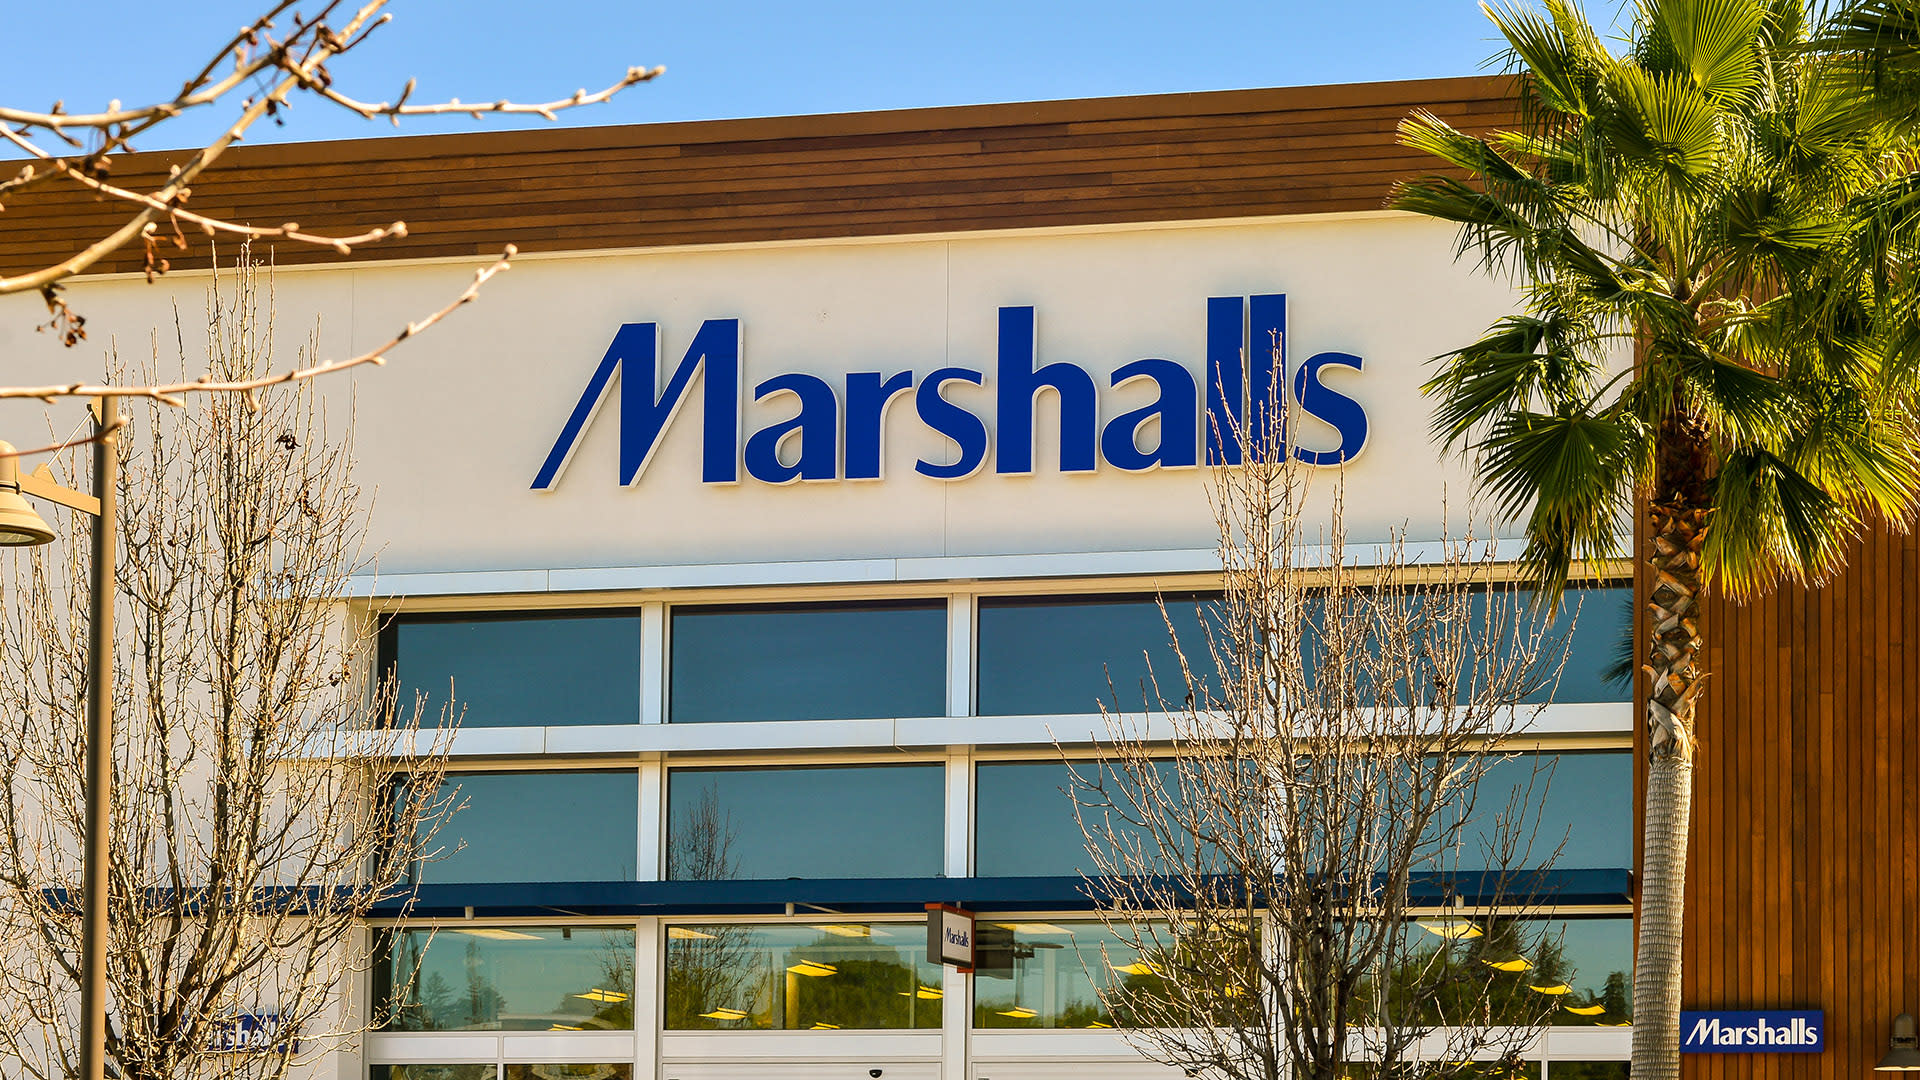 Marshalls FINALLY Has an Online Store, and We Can't Handle It